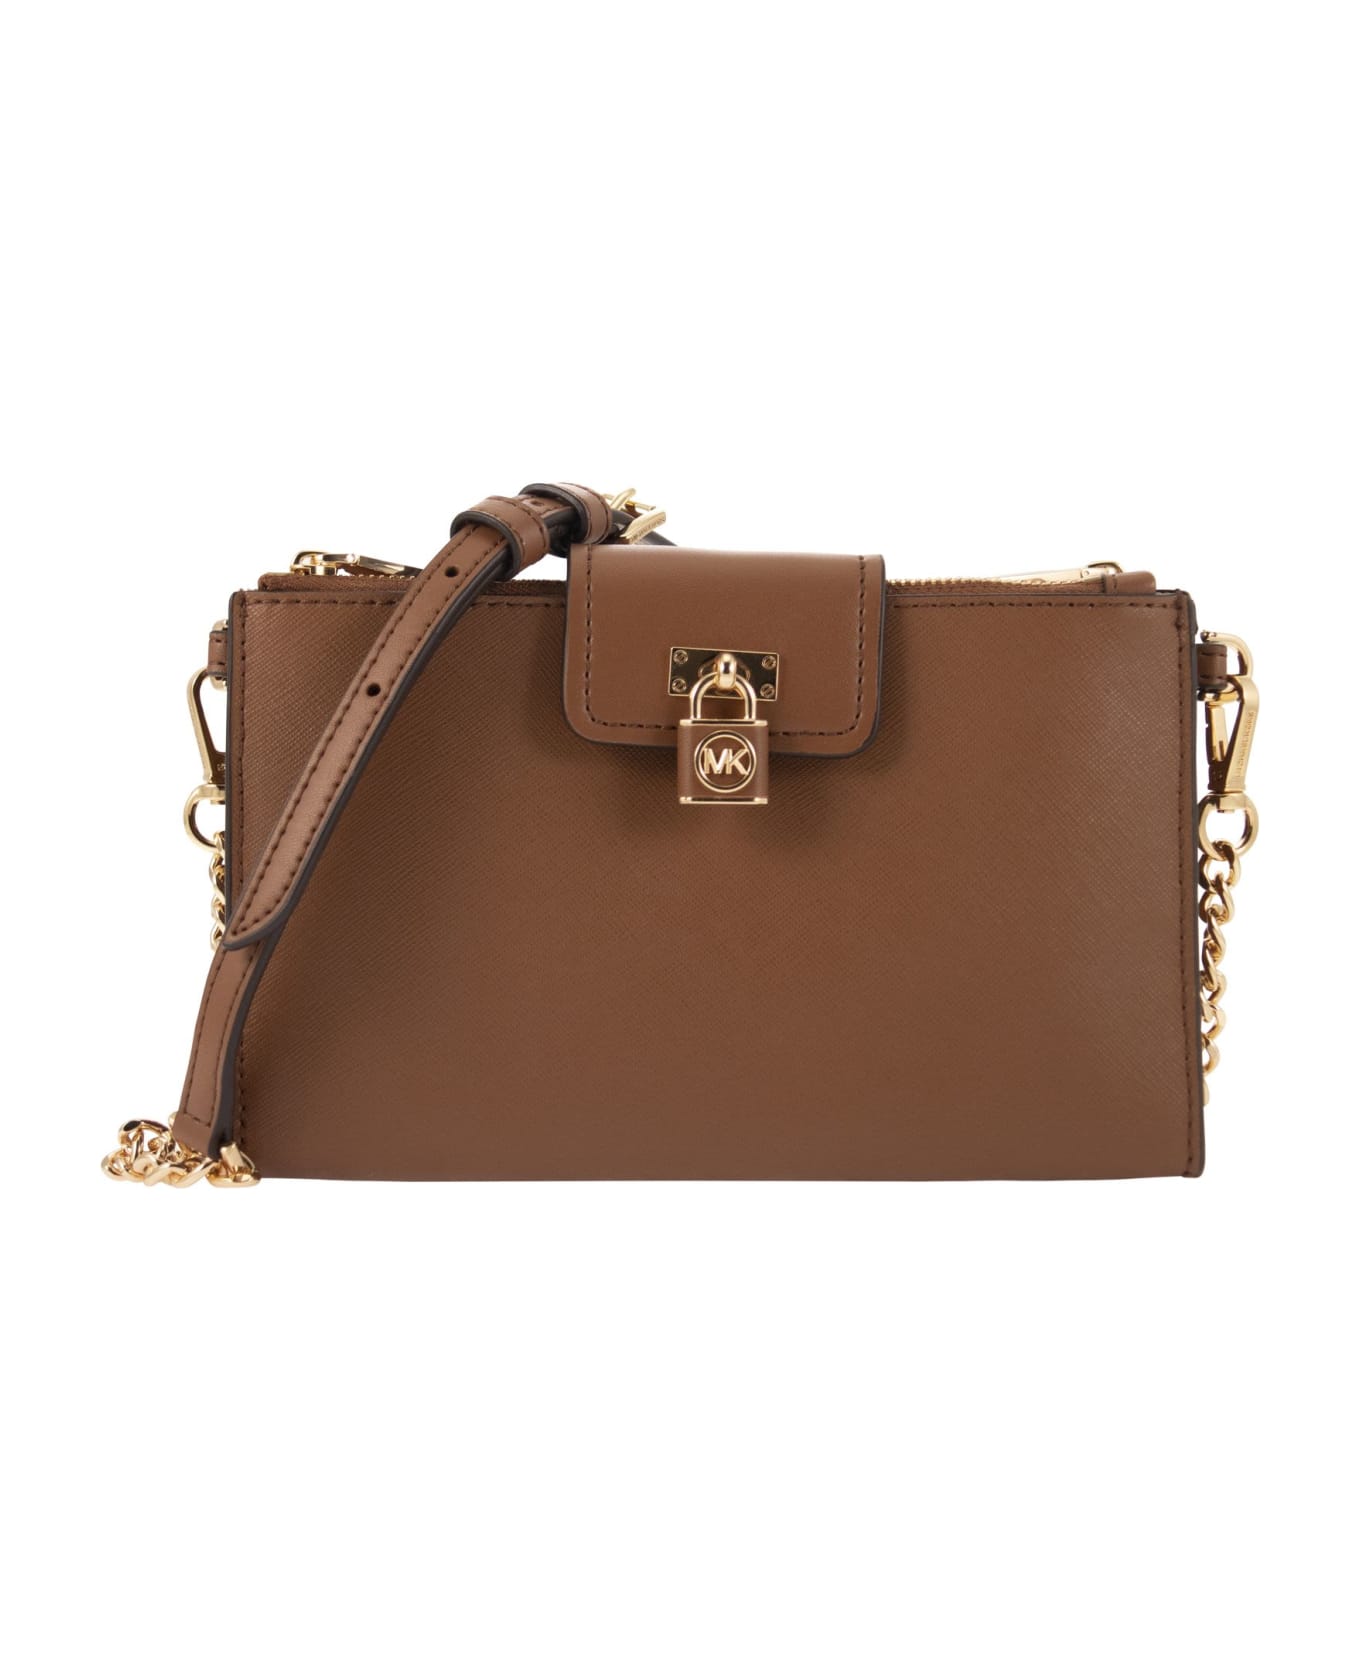 Michael Kors Ruby Bag In Saffiano Leather - Brown